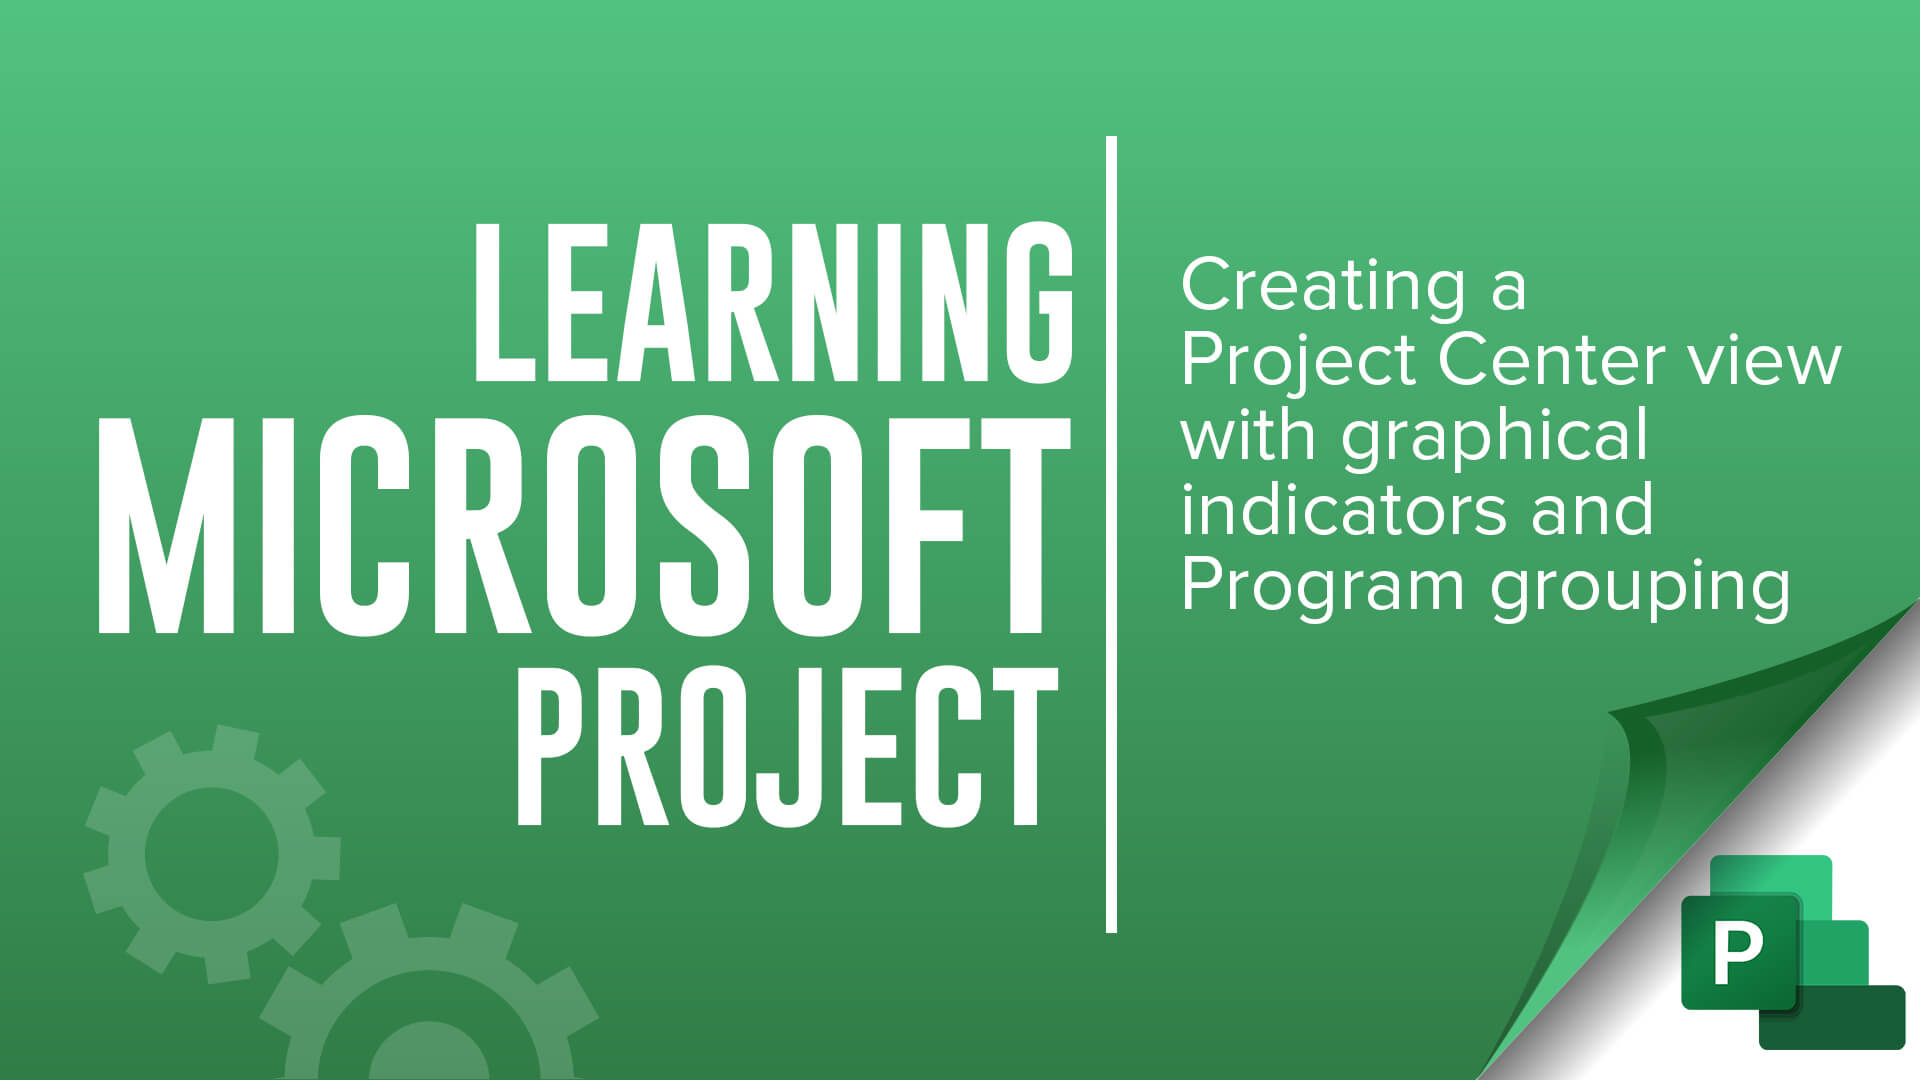 learning Microsoft Project Online - create a project center view with graphical indicators and program grouping